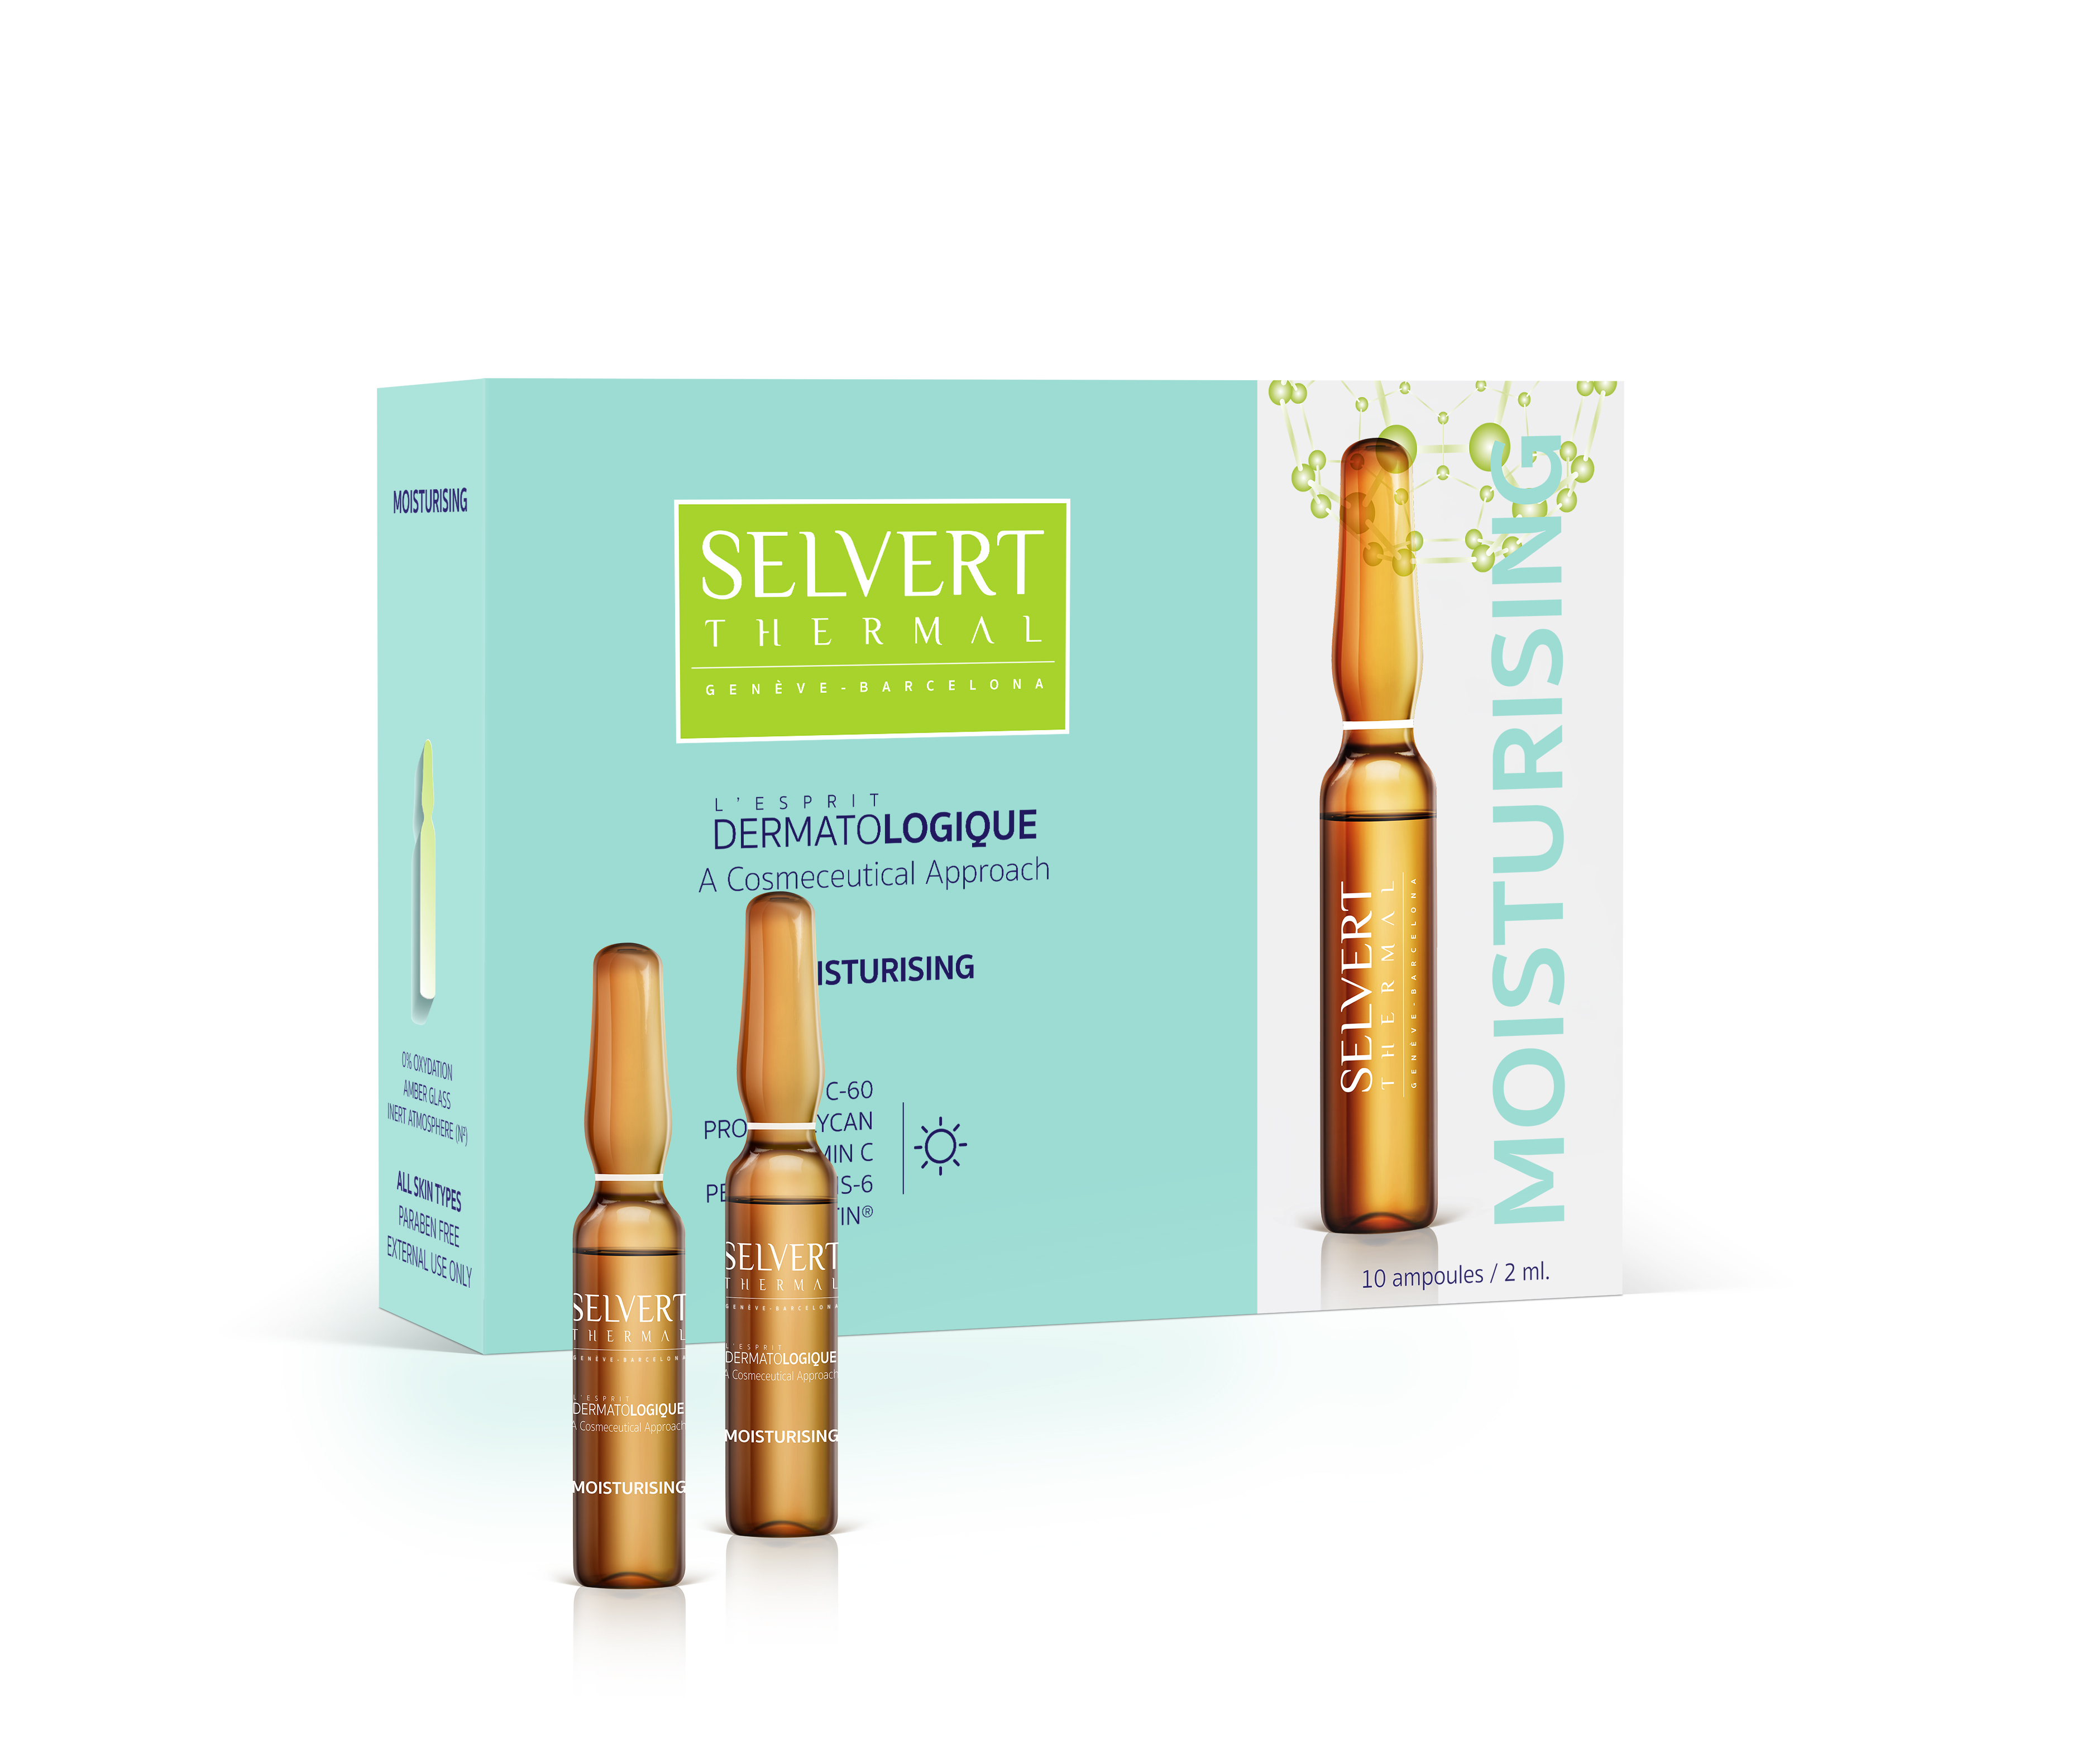 Selvert Thermal Moisturising Concentrate 長效鎖水補濕安瓶 ...